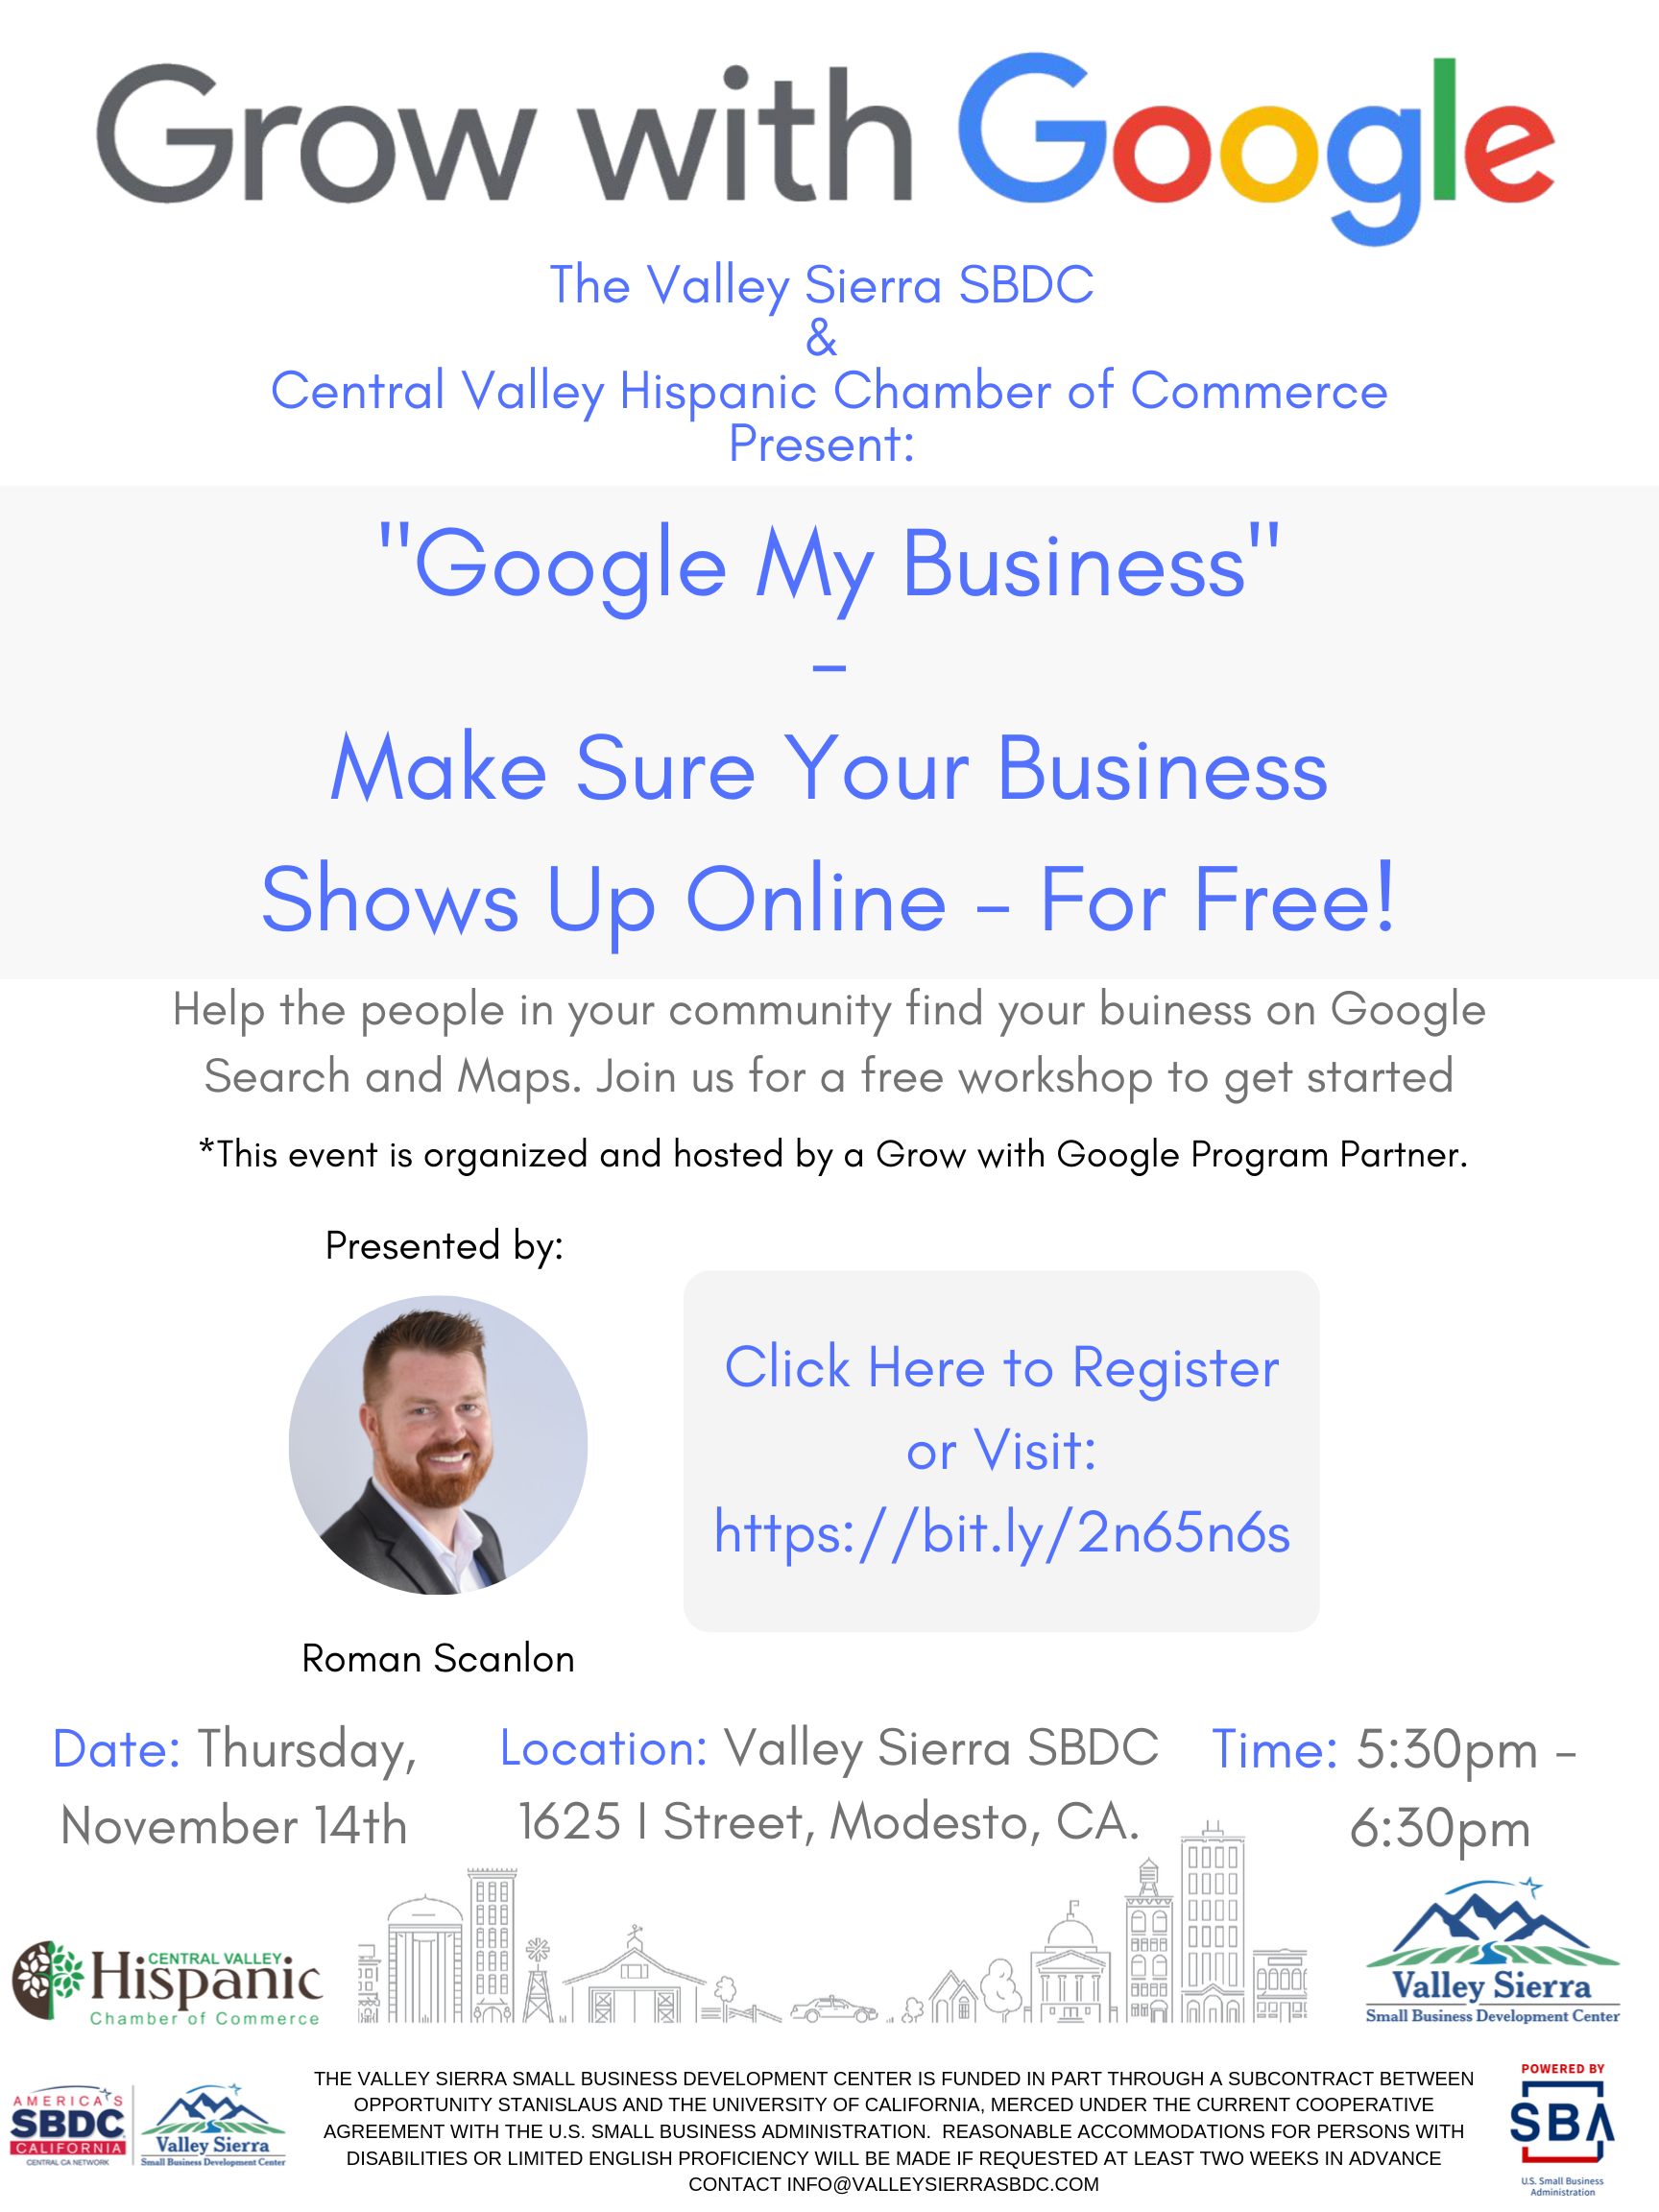 Event Flyer, Grow with Google, Date: Thursday, Nov. 14th, 2019, Time, 5:30pm - 6:30pm, For more details contact info@valleysierrasbdc.com.